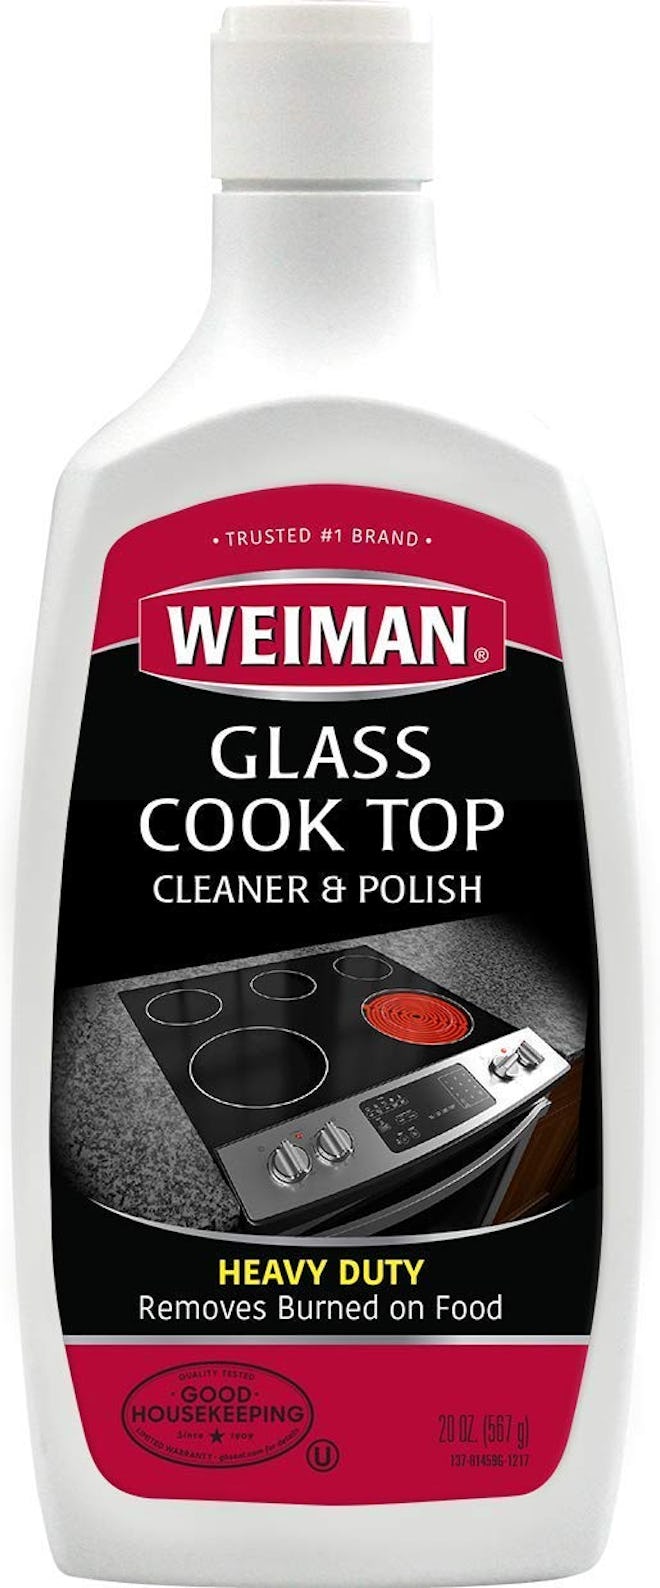 Weiman Glass Cooktop Cleaner and Polish